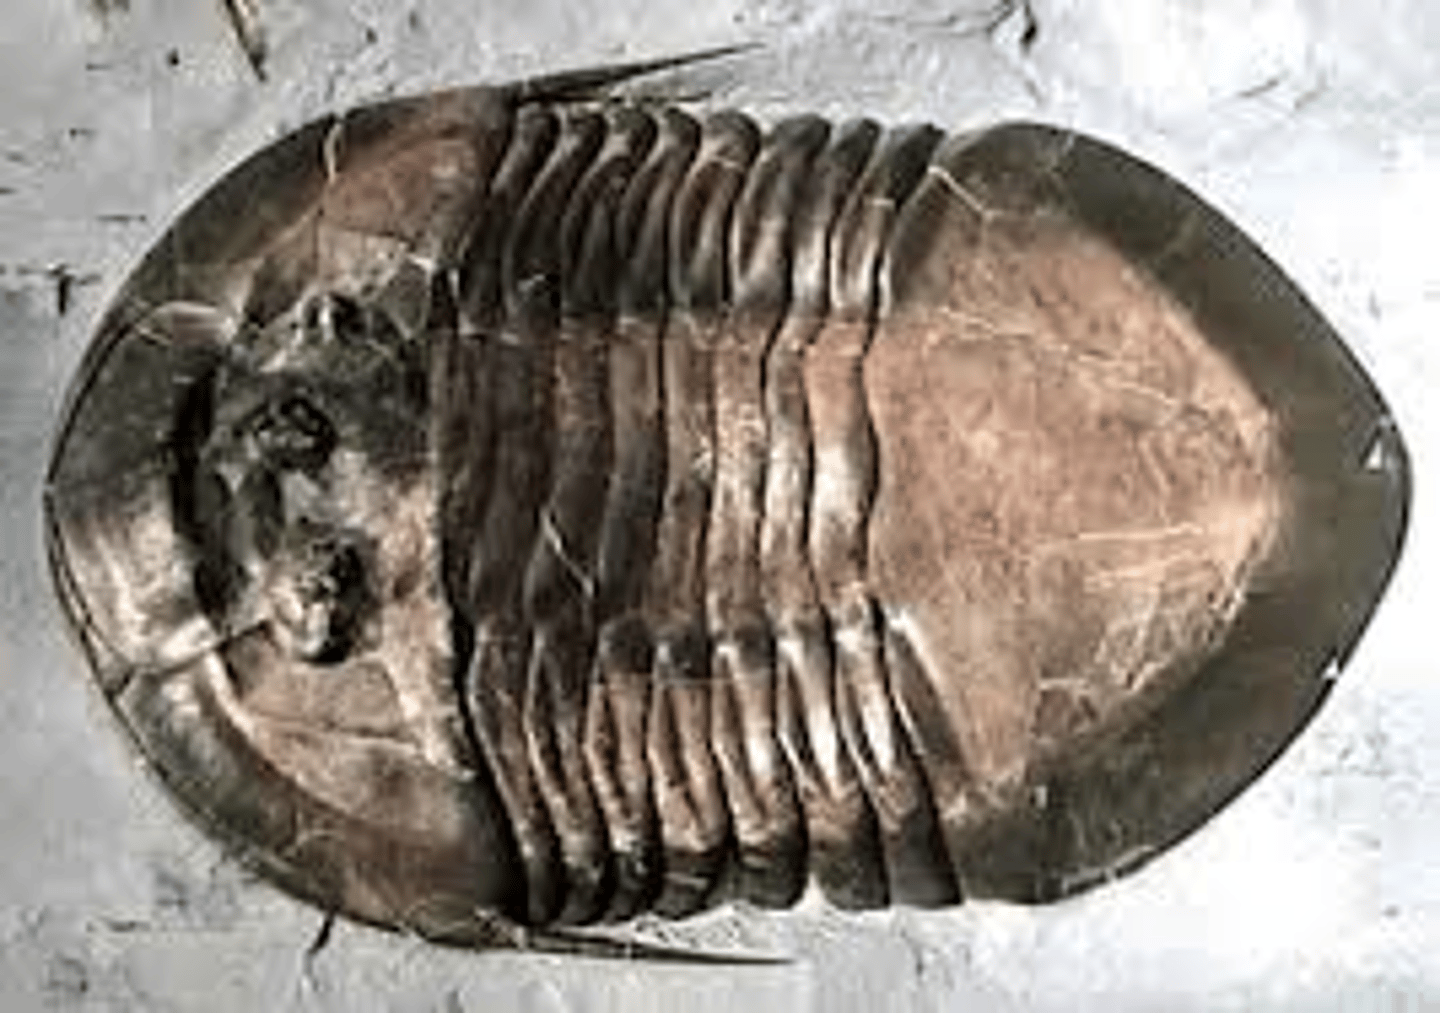 <p>Polymerid trilobite genus</p><p>a genus of asaphid trilobites from the middle and upper Ordovician period, fairly common in the Northeastern United States, northwest Manitoba, southwestern Quebec and southeastern Ontario.</p>